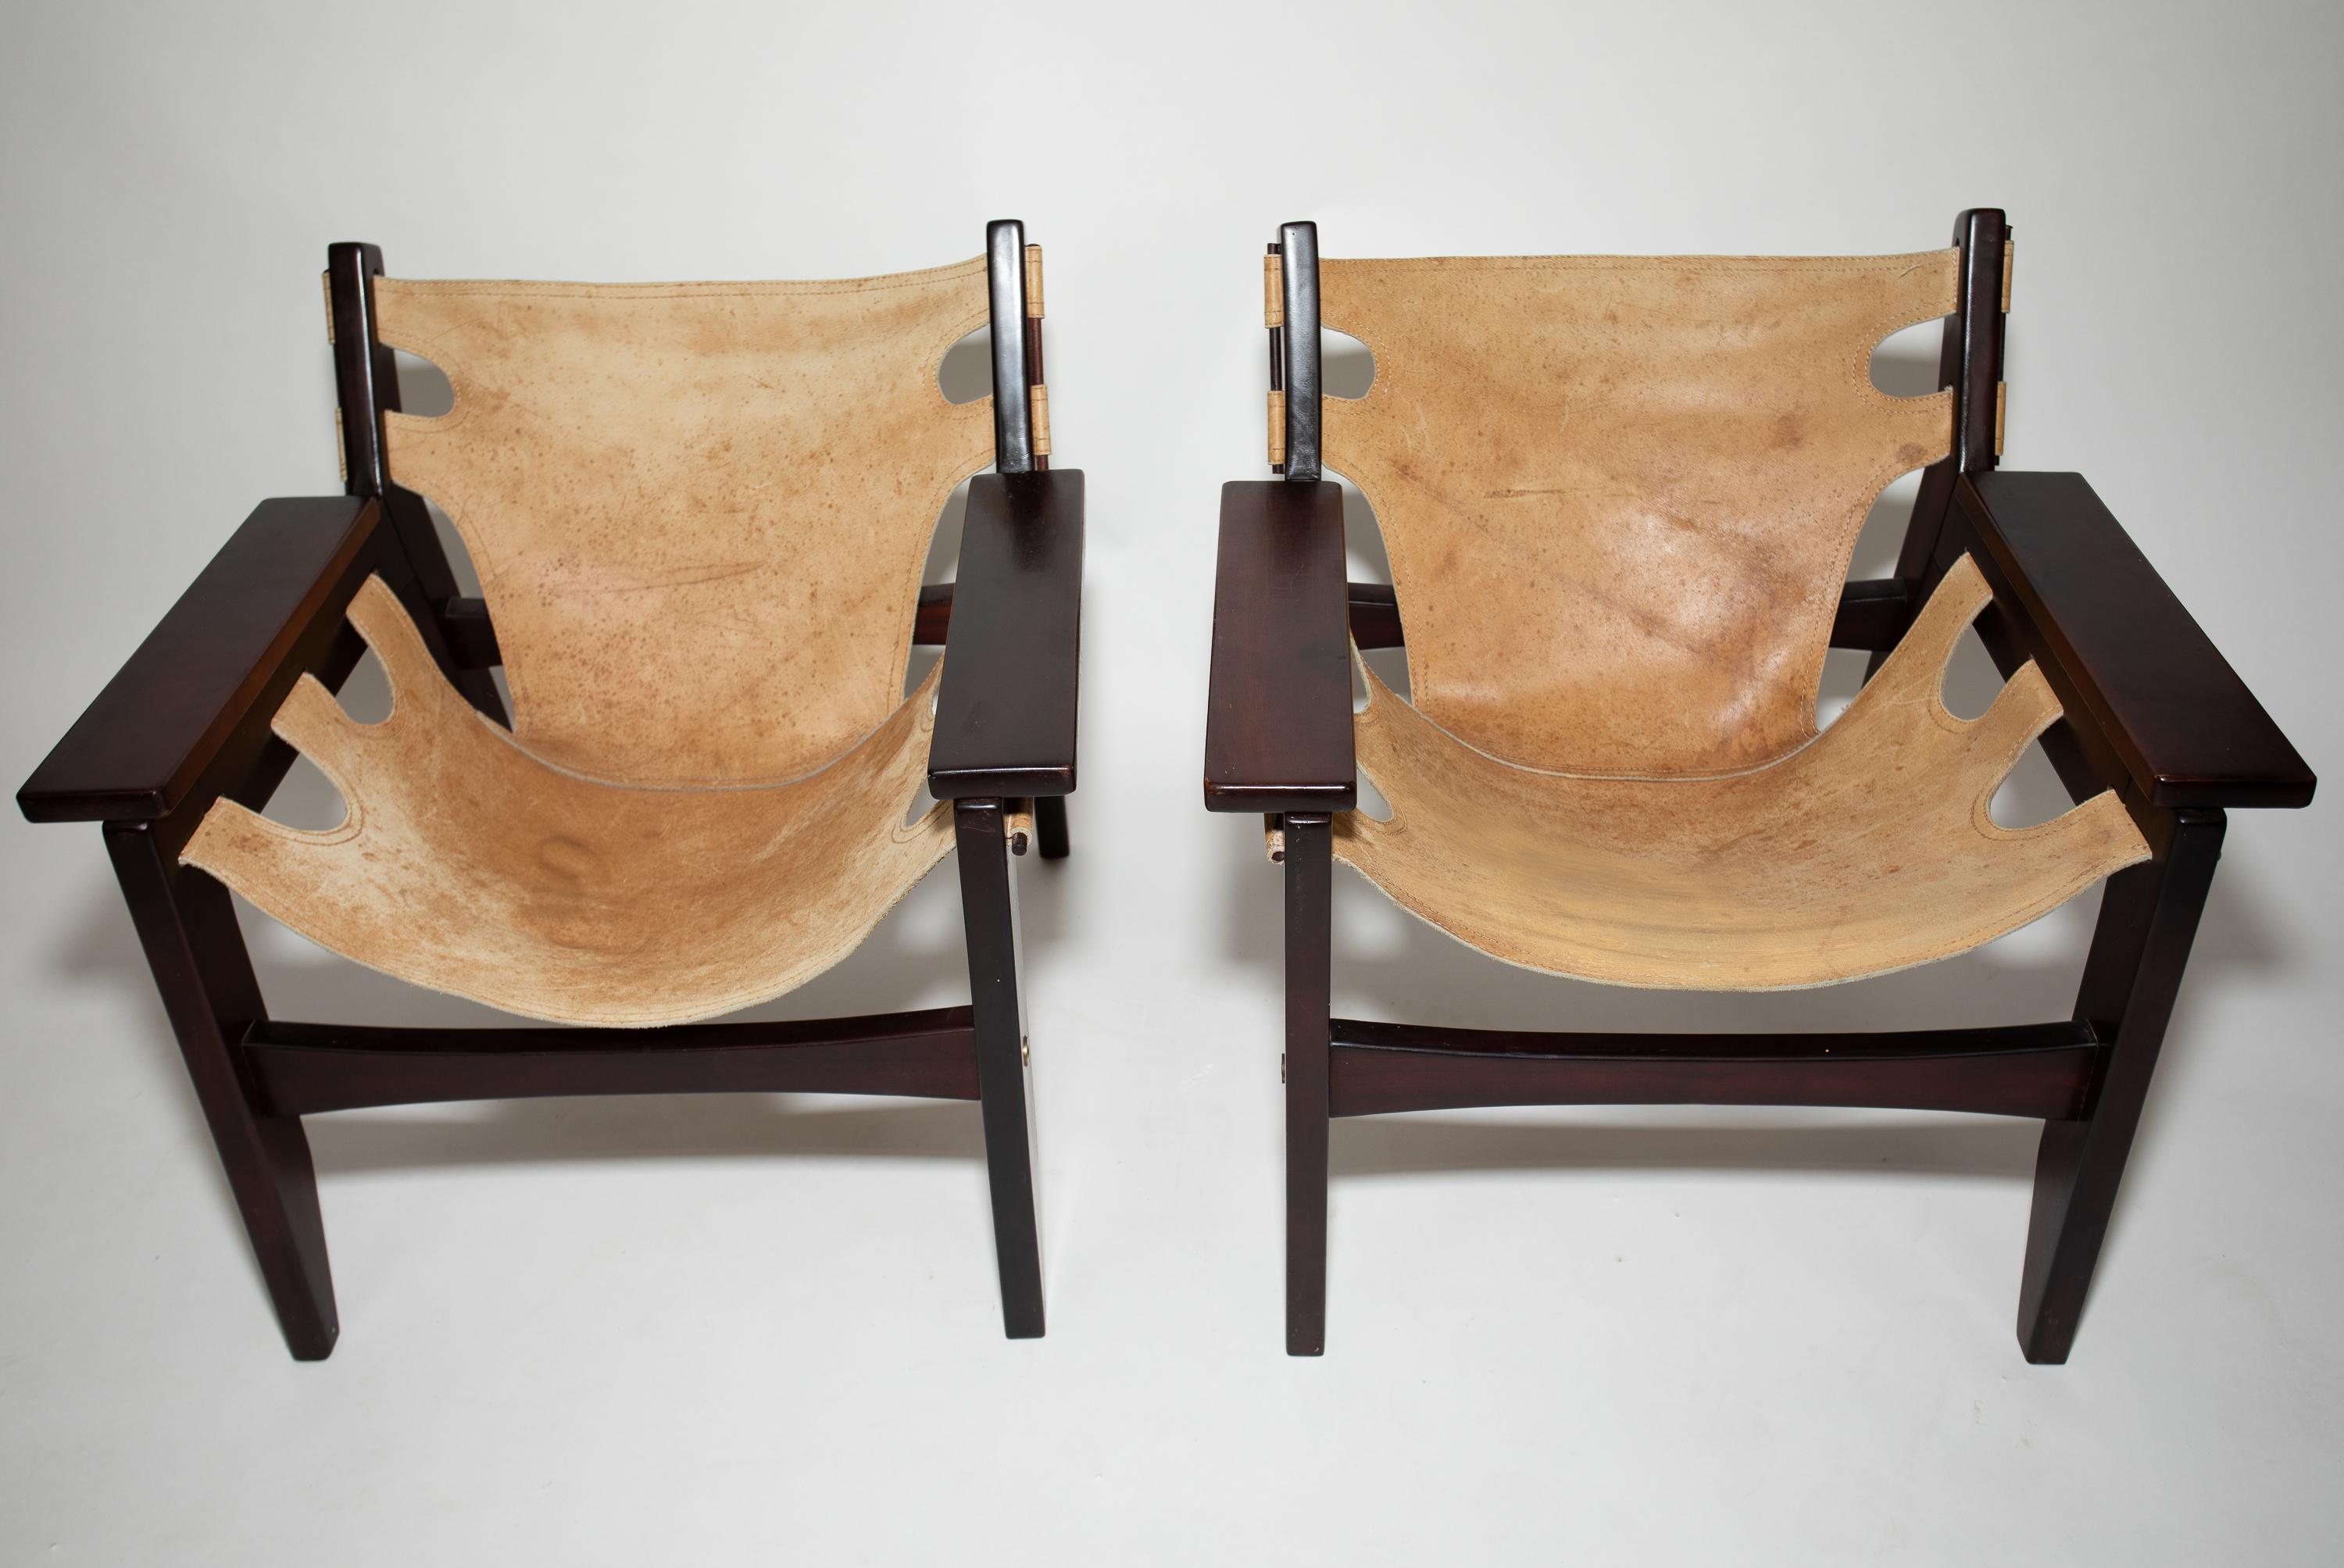 Sergio Rodrigues Kilin Chairs.
Original Leather and Wood Surface.
OCA Label present.